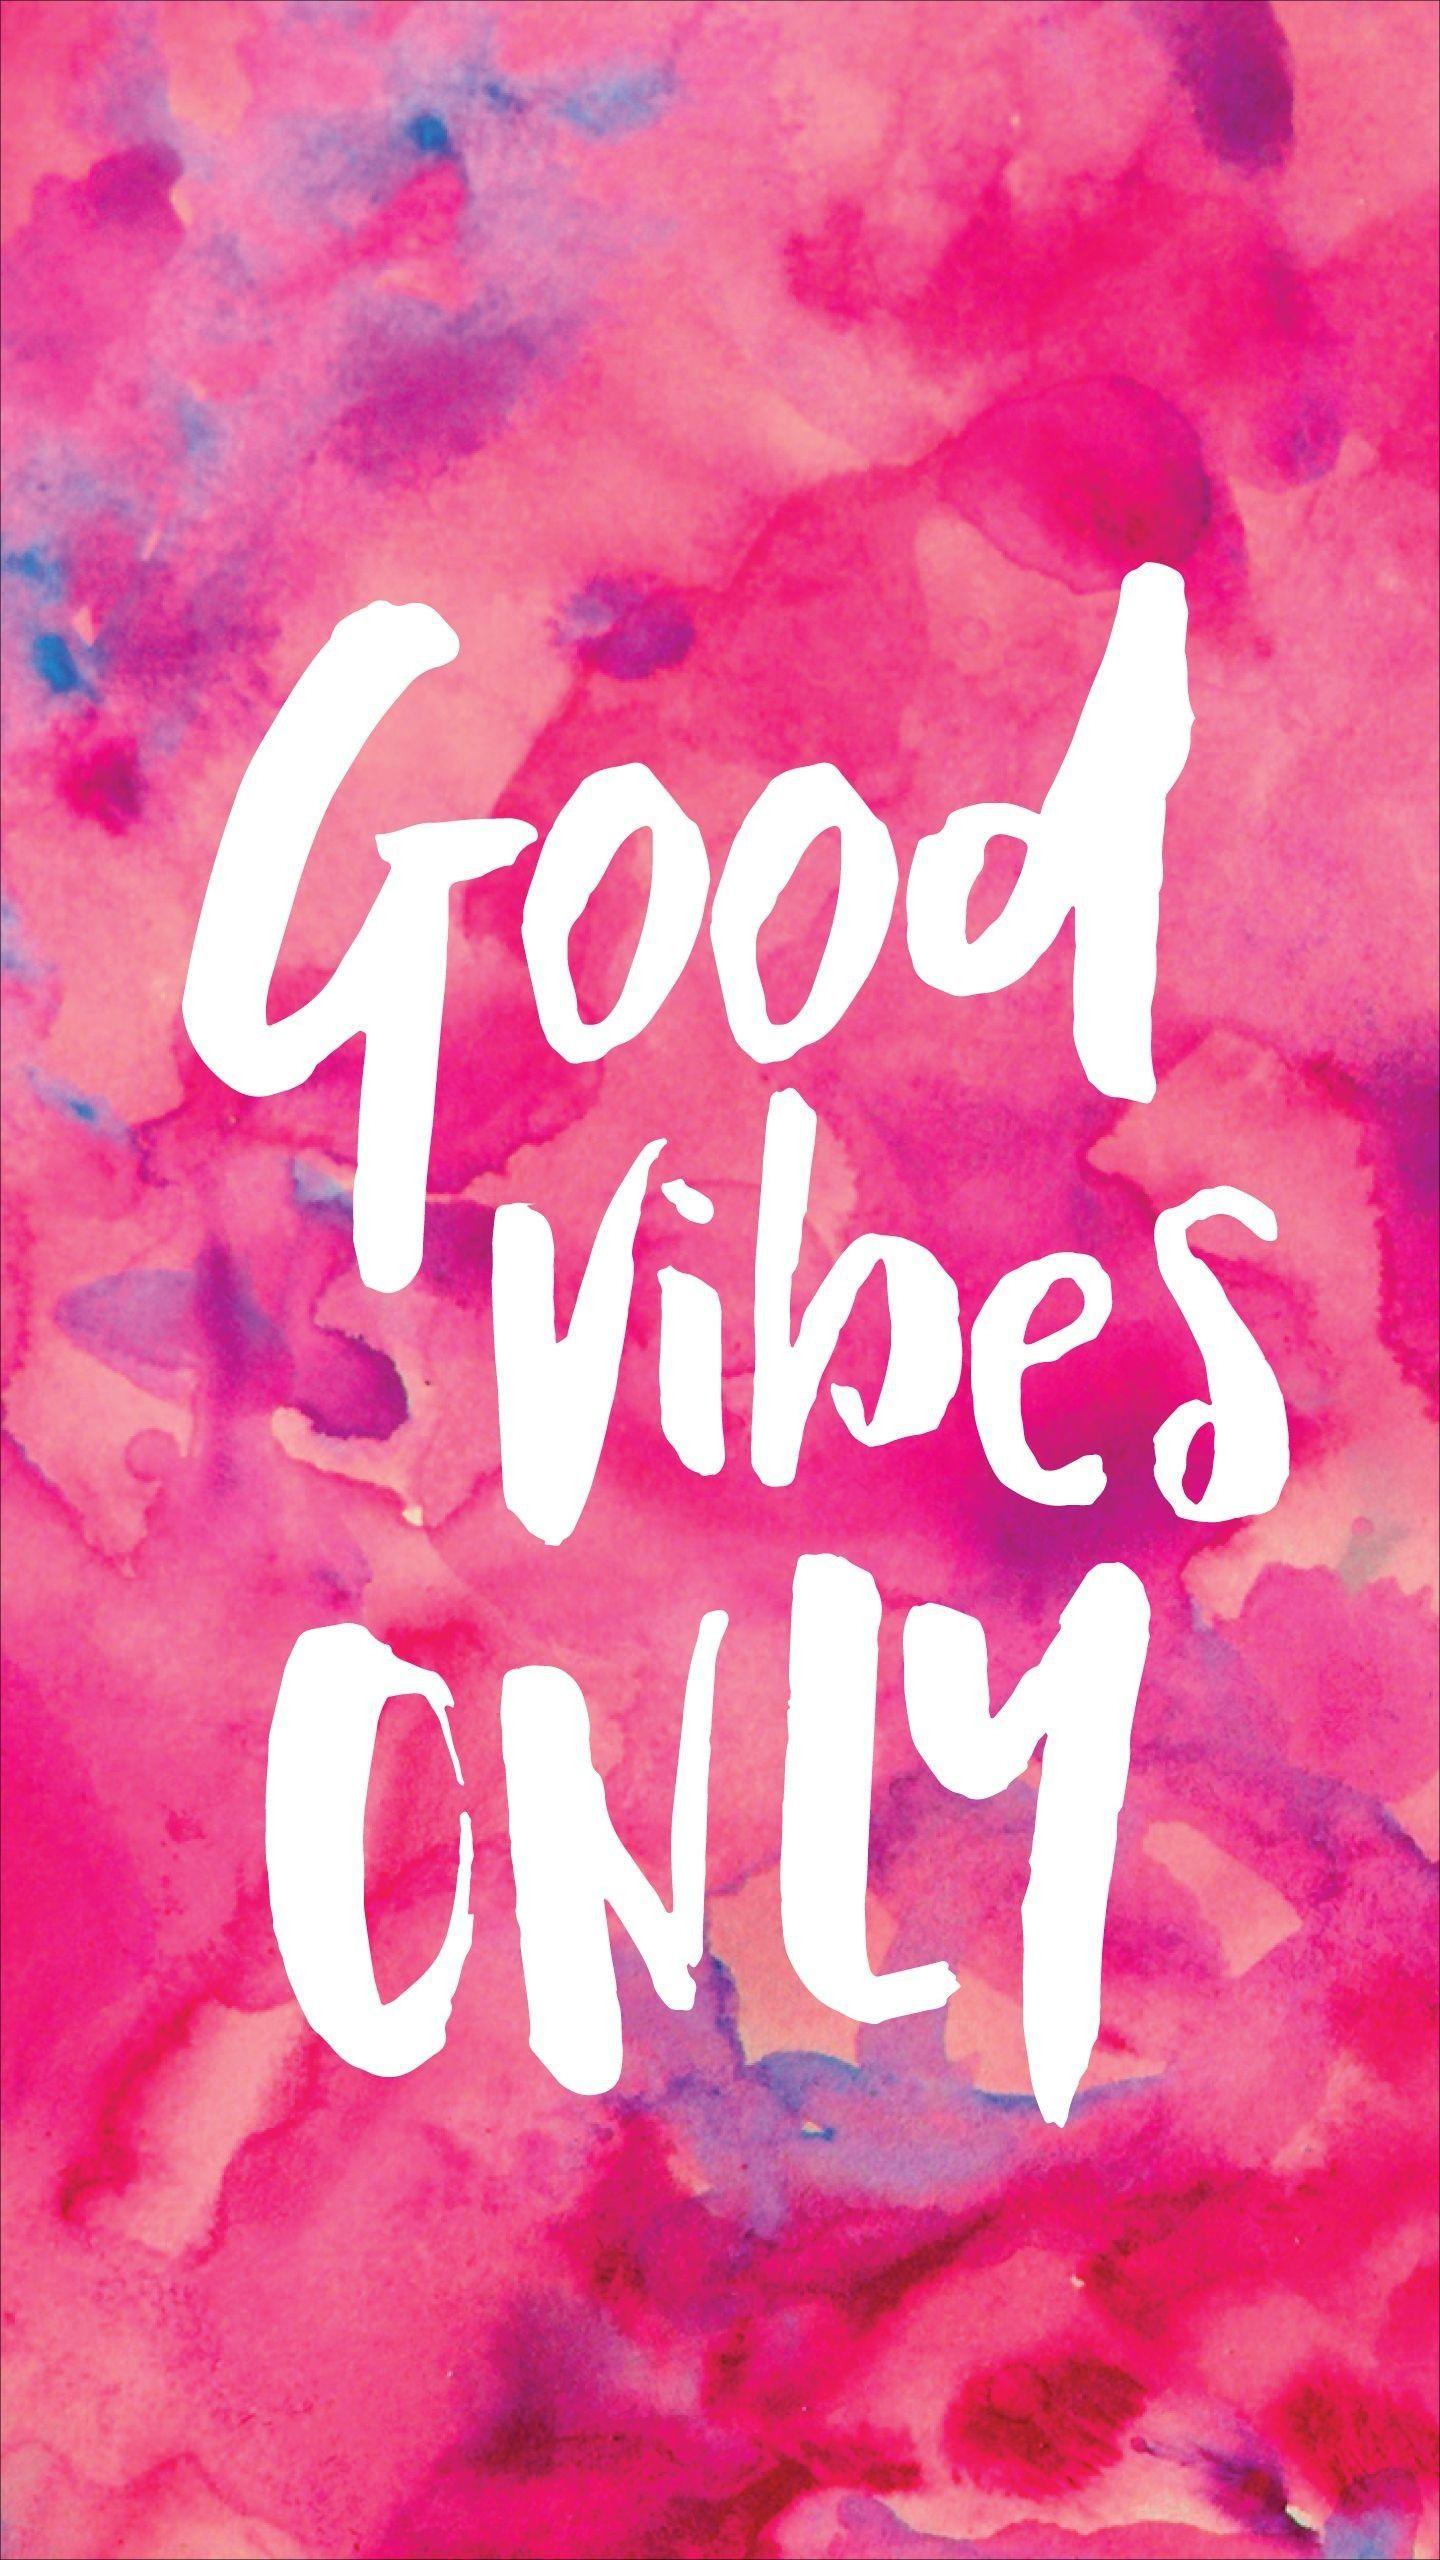 Good Vibes Only wallpaper by Tw1stedB3auty - Download on ZEDGE™